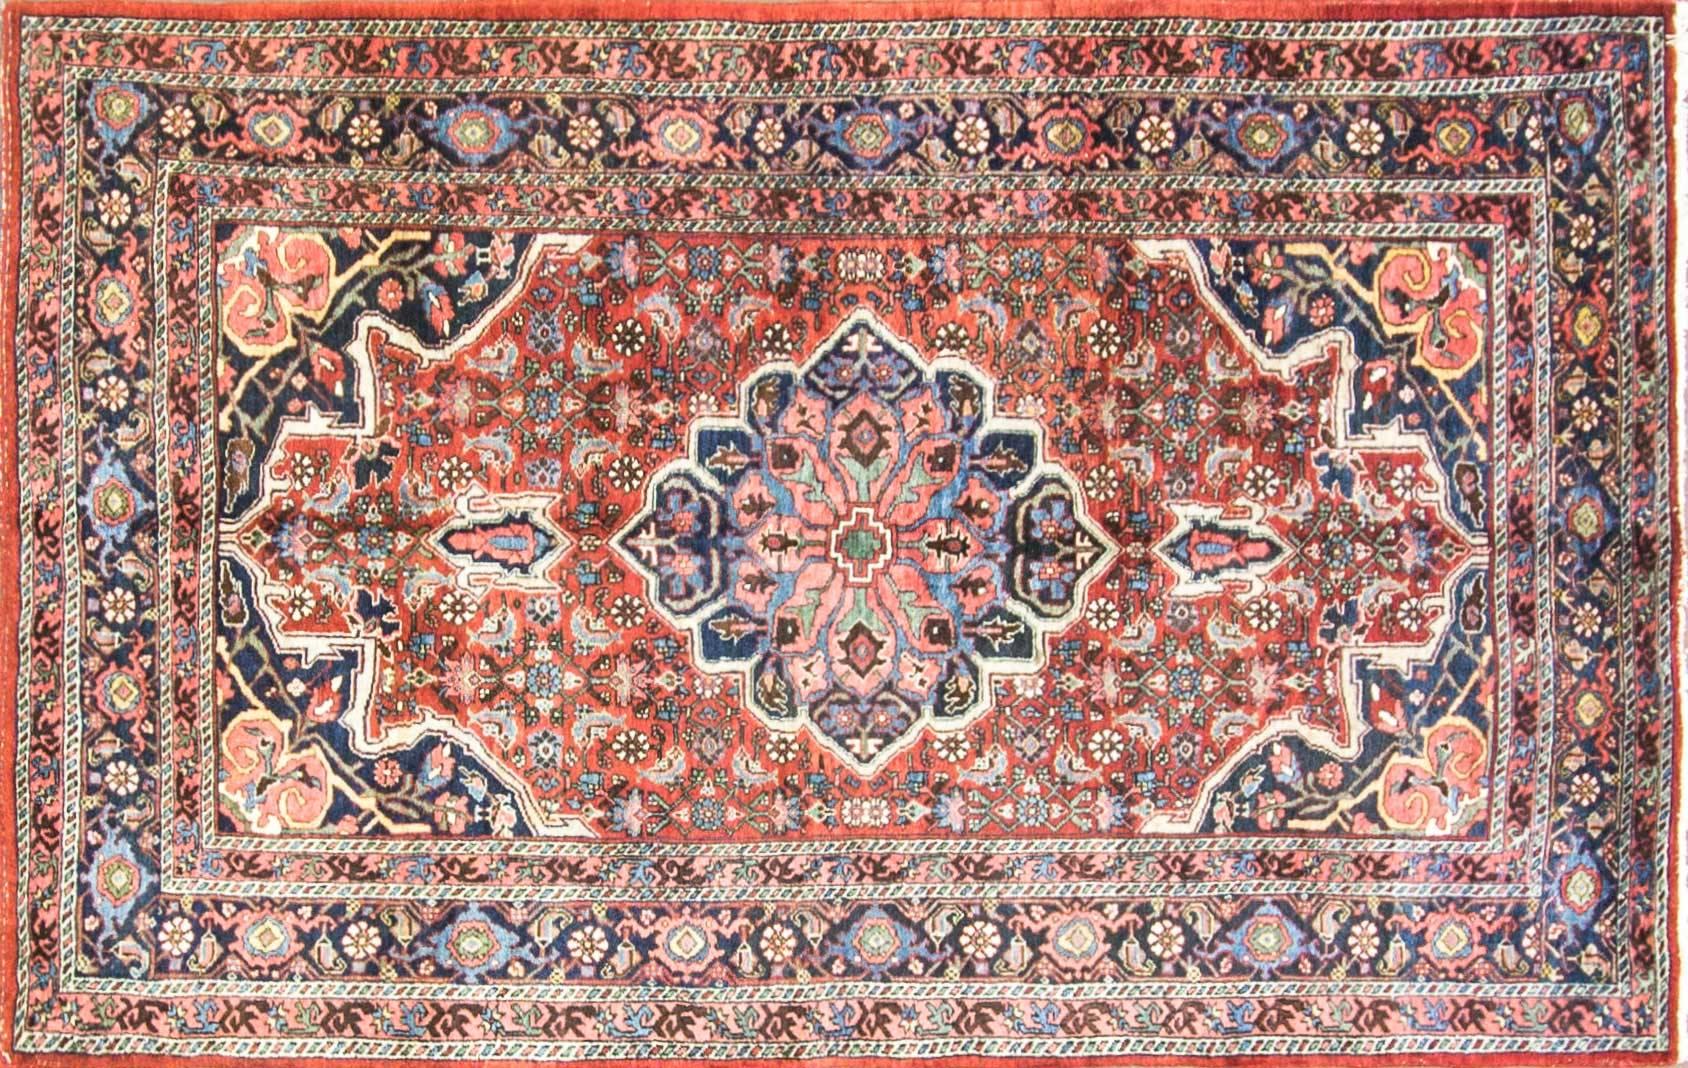 Please ask me the best way to ship this rug.
Bidjar is the name of a small Kurdish town in western Iran. (or Bidjar) Kurdish rugs are often called the Iron Rugs of Iran. The Bijar was a heavy, durable rug that has been very popular in the United